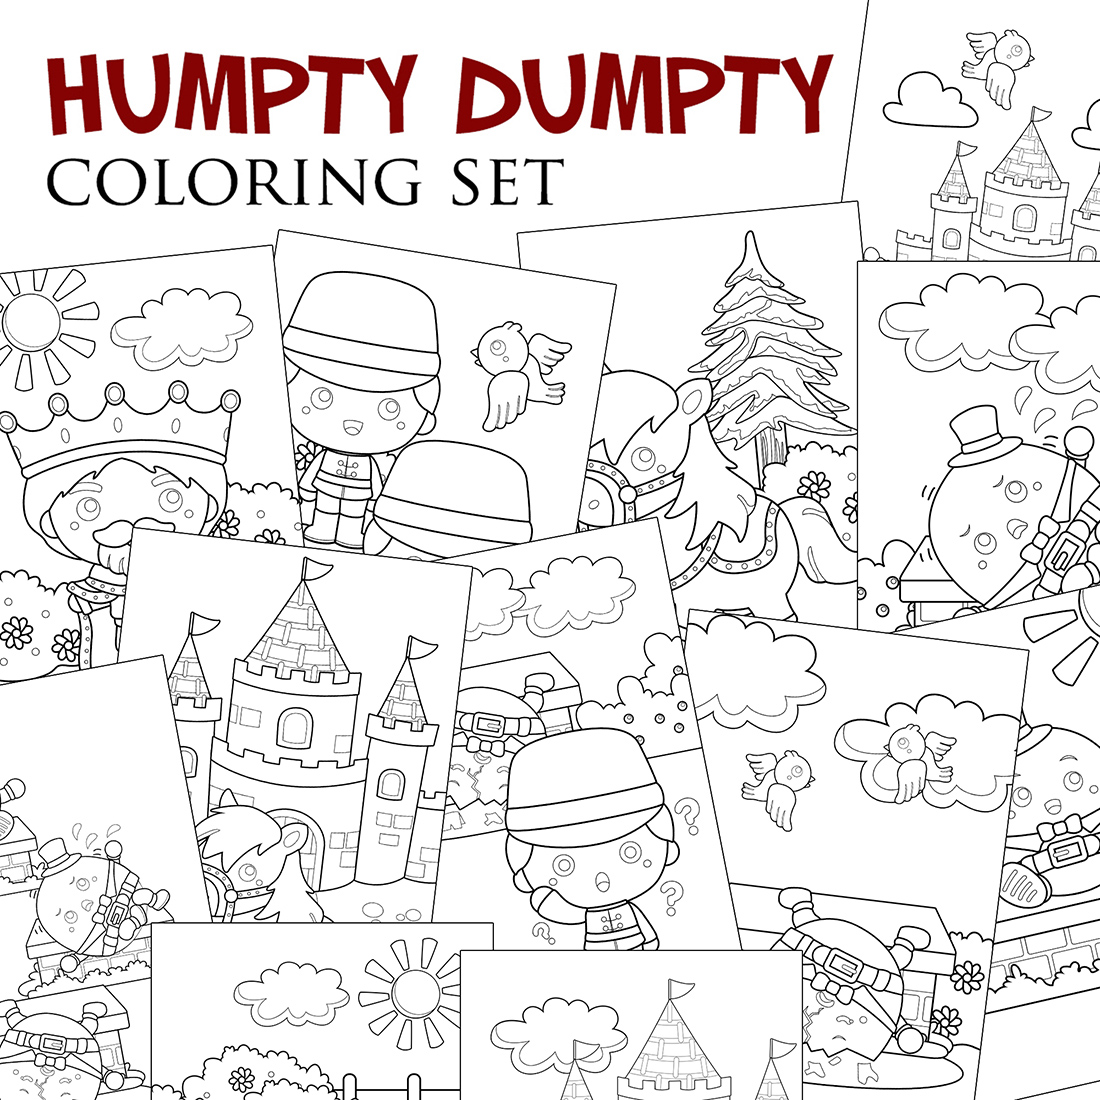 Humpty Dumpty Classic Song Rhymes Story Coloring Pages Activity For Kids And Adult cover image.